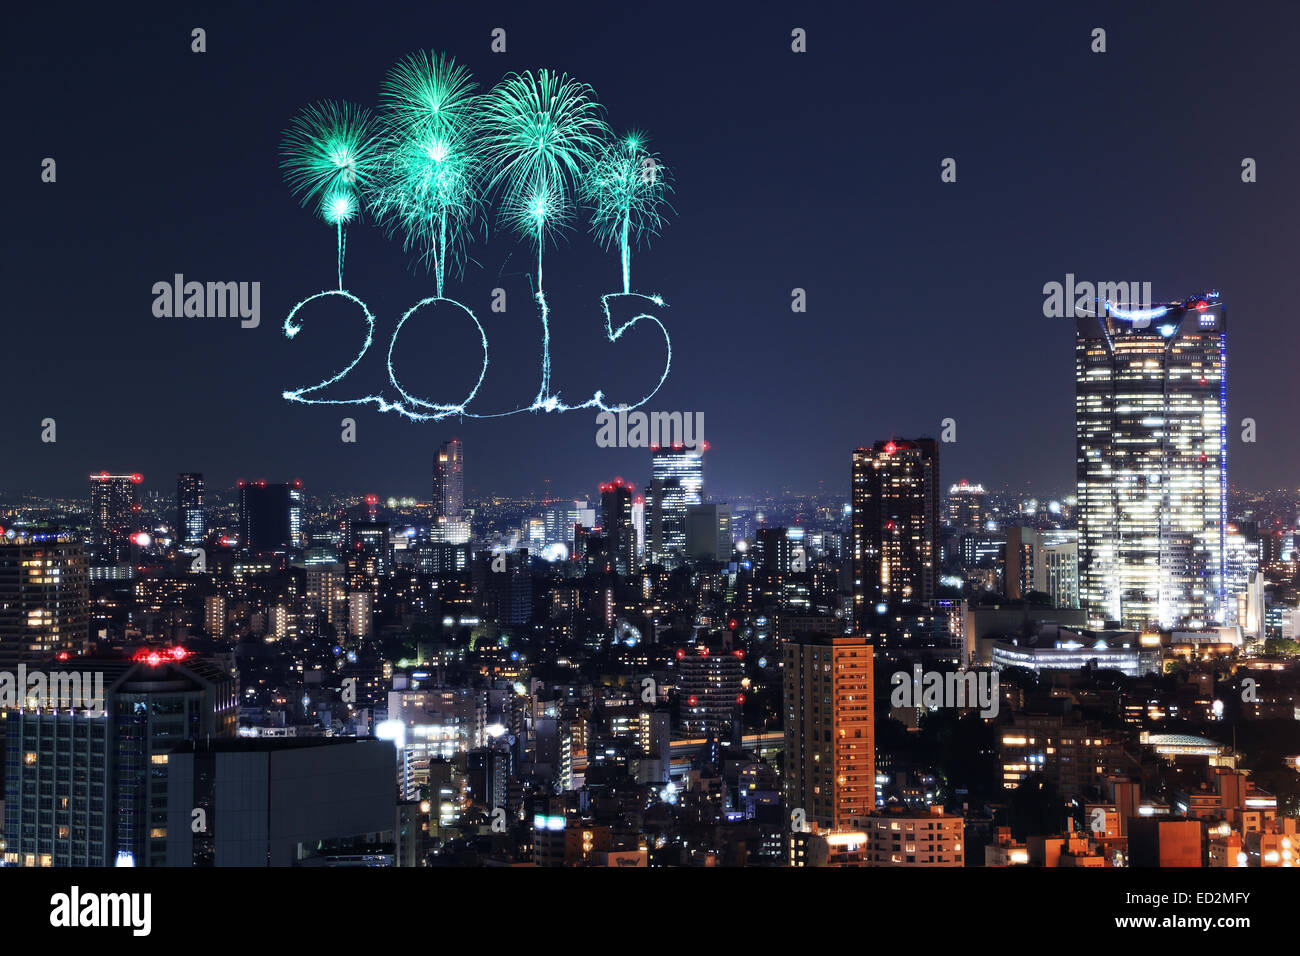 2015 New Year Fireworks celebrating over Tokyo cityscape at night, Japan Stock Photo